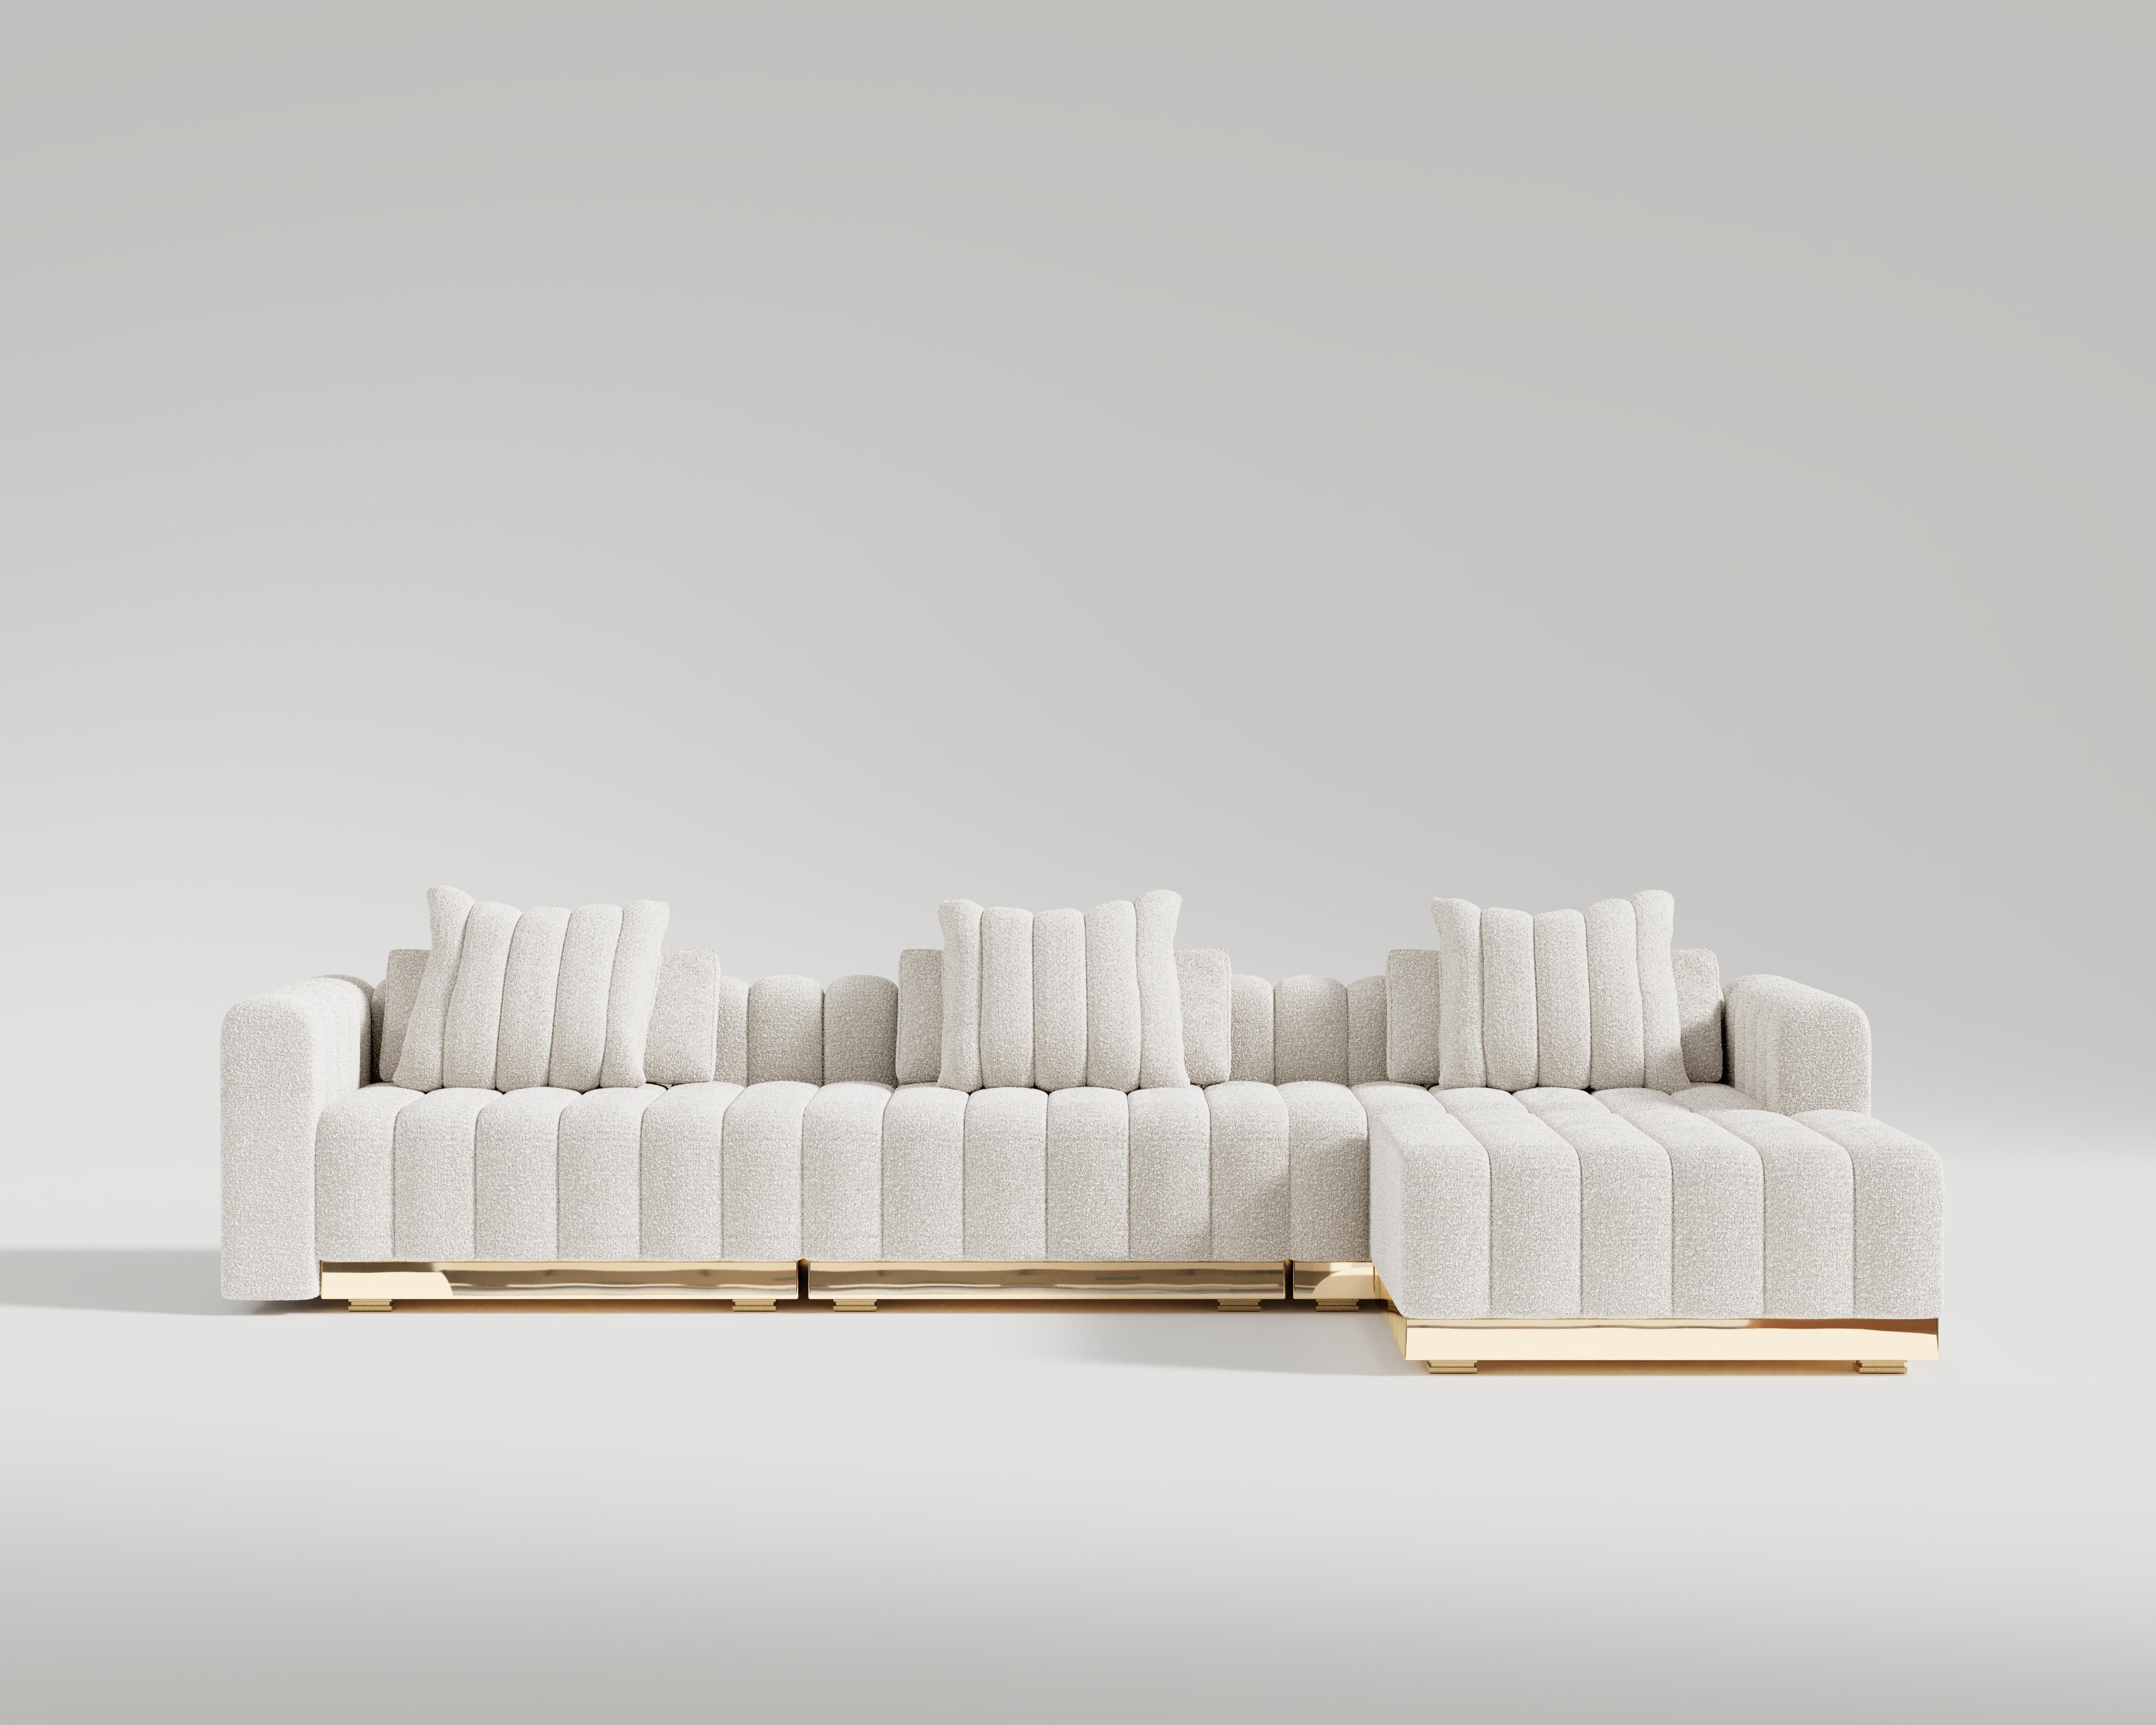 El Mar Sectional Sofa

Inspired by the waves of the sea, the powerful and magnificent design, with unique bronze detailing on the base makes it elegant. Fall back into the luxurious and supple feel of the EL Mar Modular Sectional. the refined